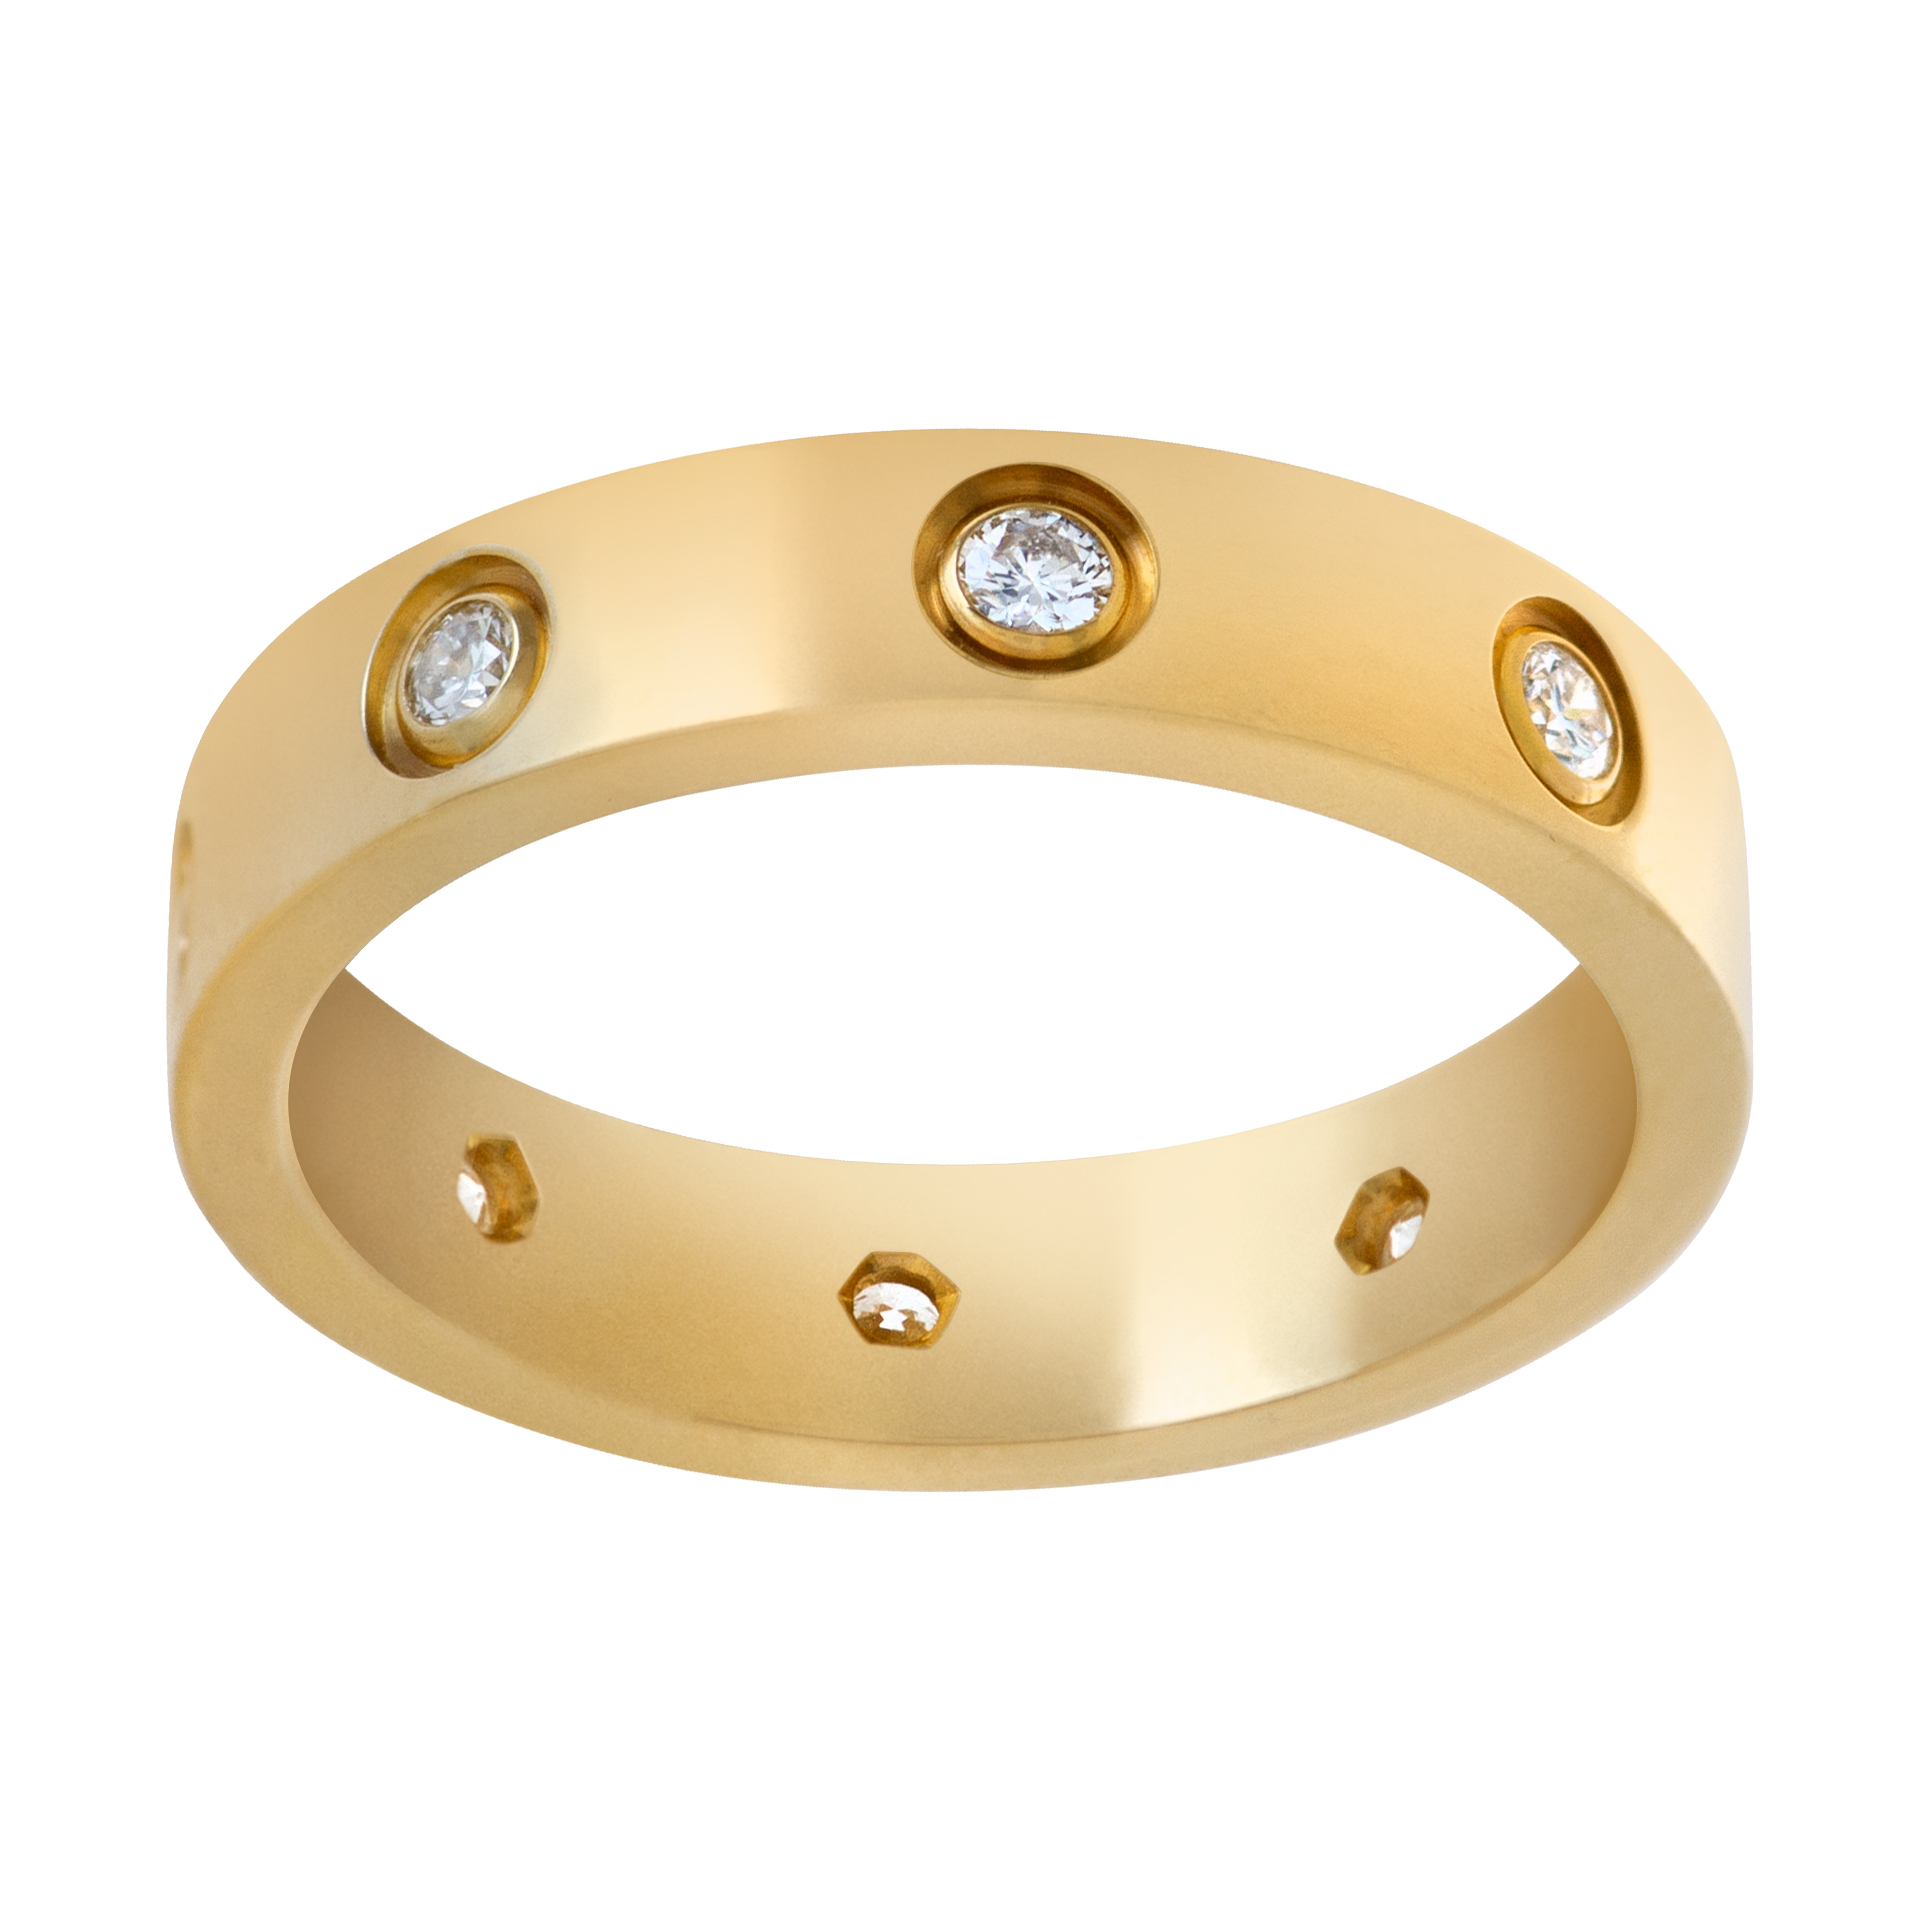 Cartier Love wedding band in 18k with diamonds (Stones)